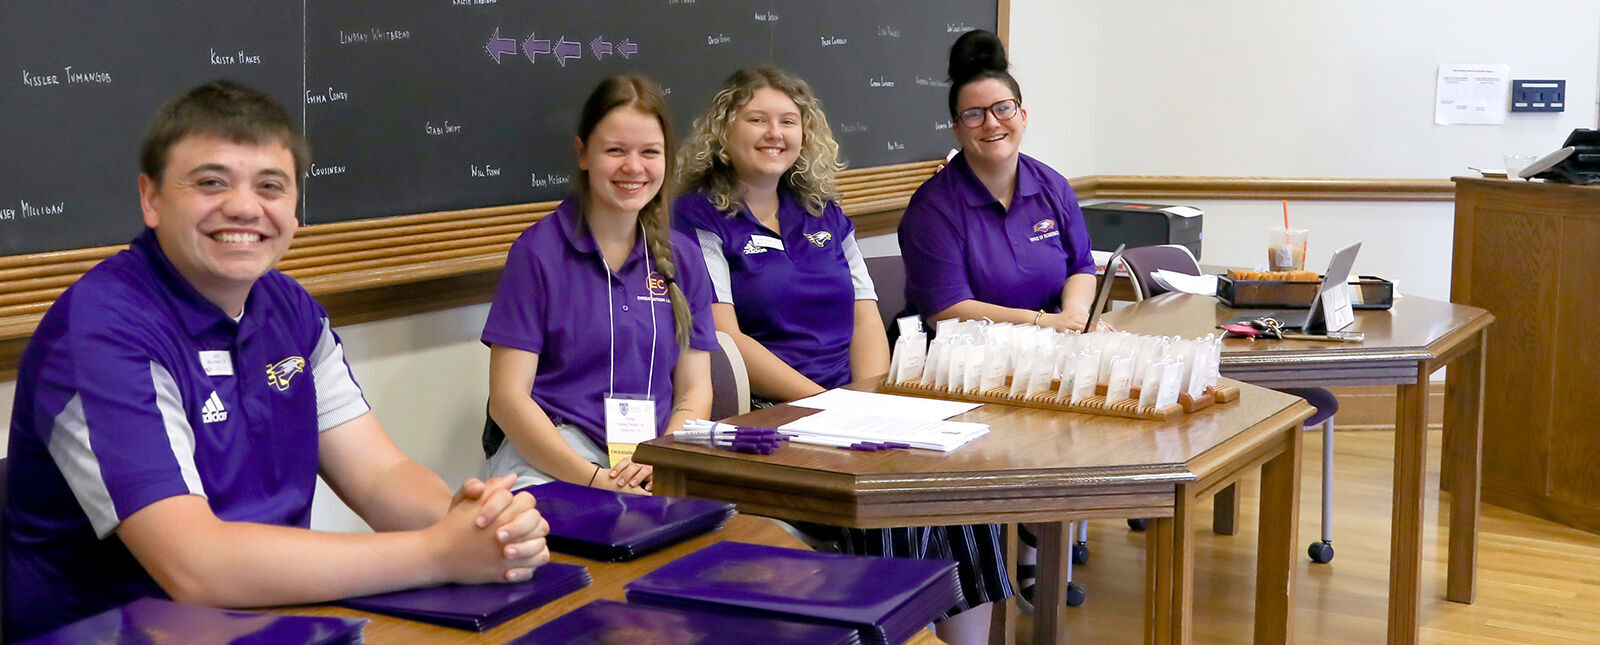 Admissions staff and helpers smile at greeting tables during Summer Orientation